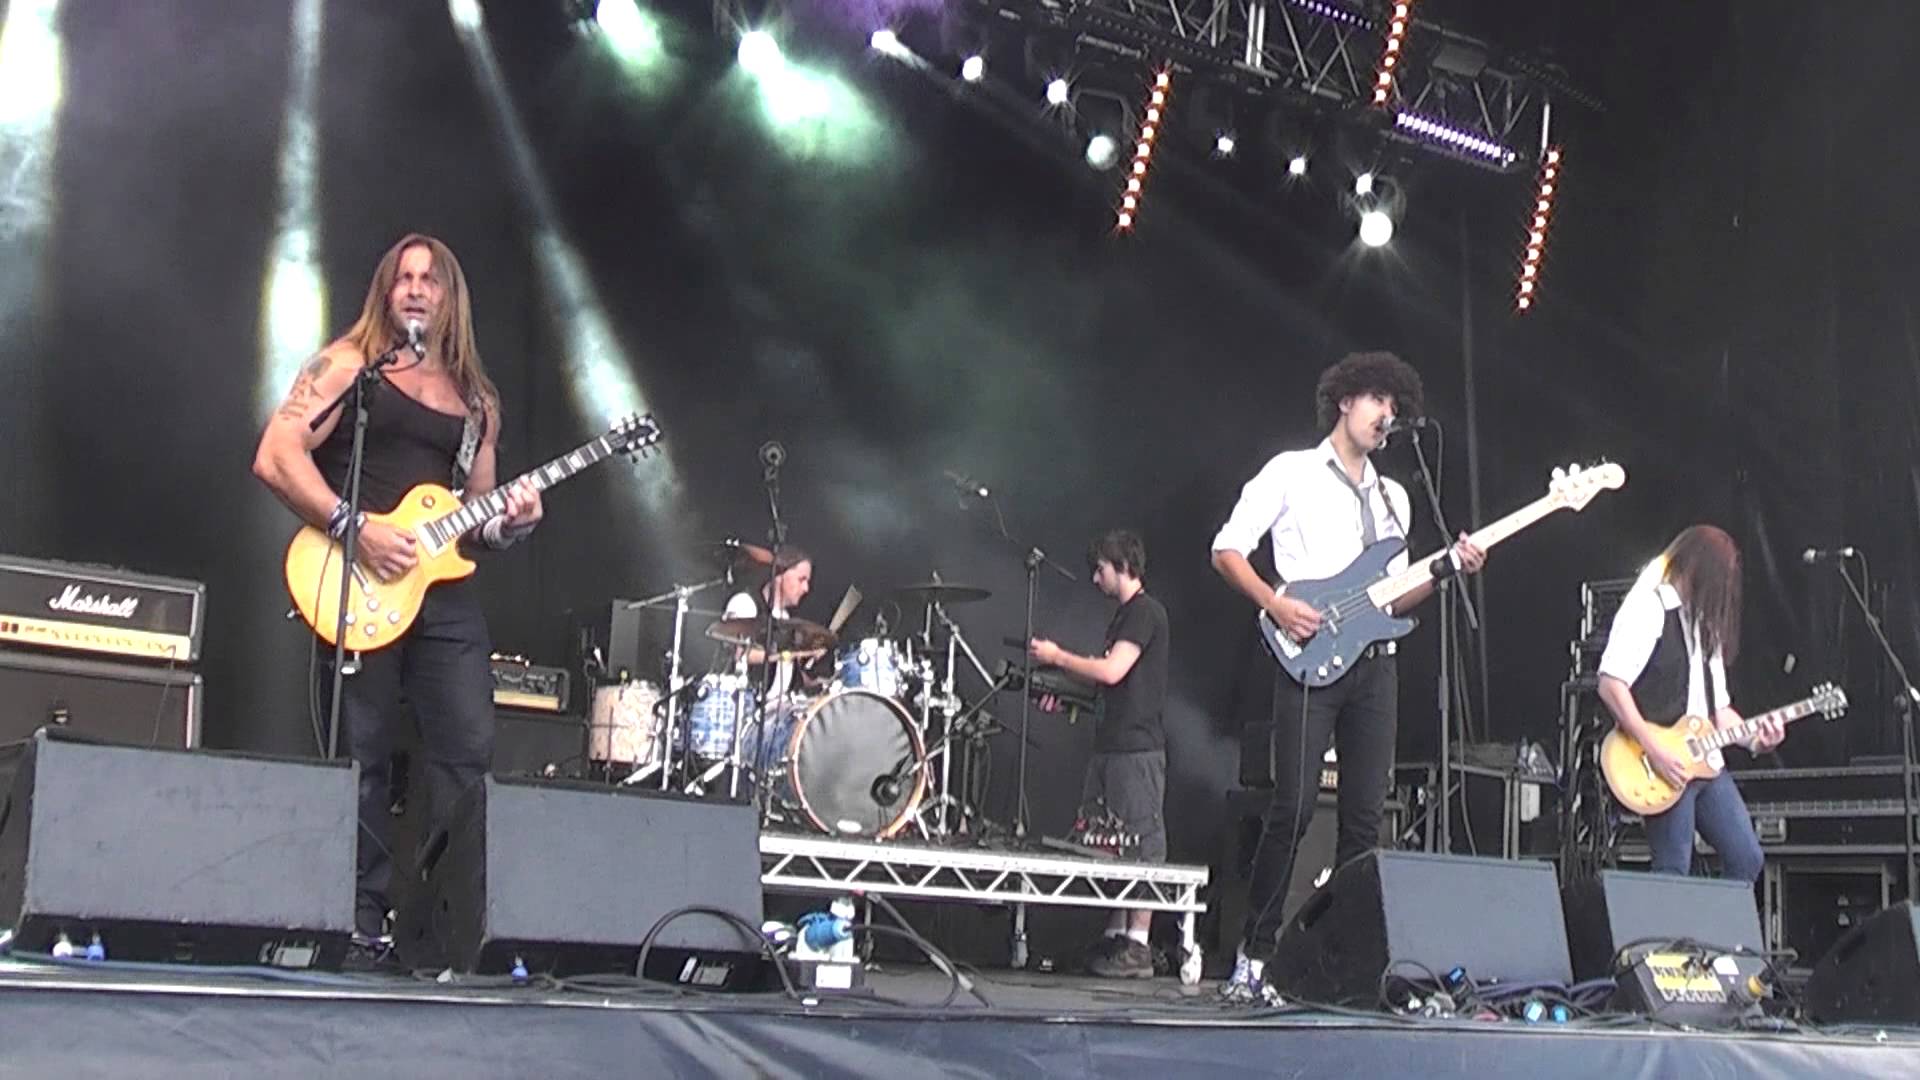 The Thin Lizzy Experience at Tribfest 2013 - 'The Boys are Back